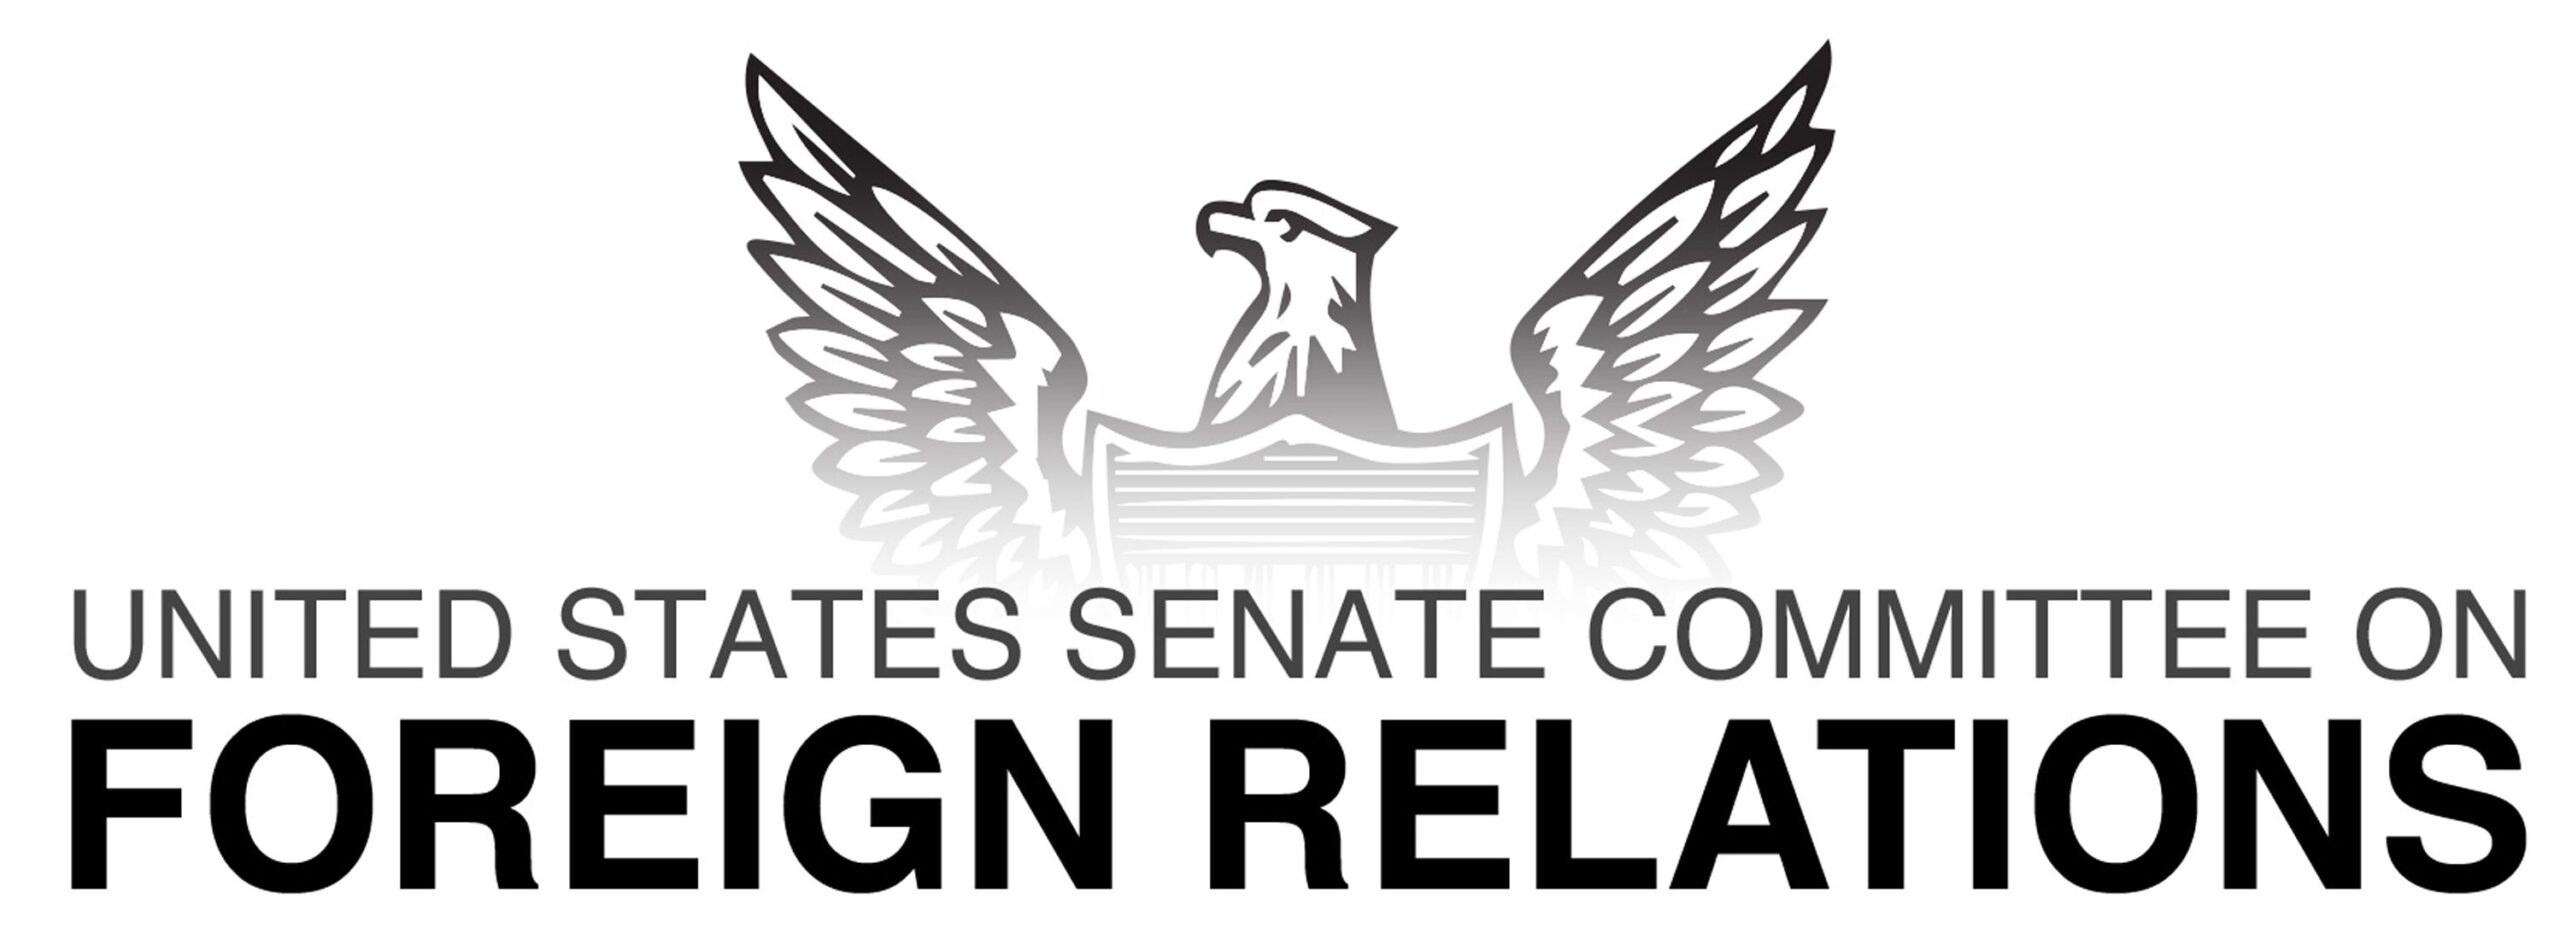 US Senate committee resolution urges SL govt to ‘listen to people, respect their rights’